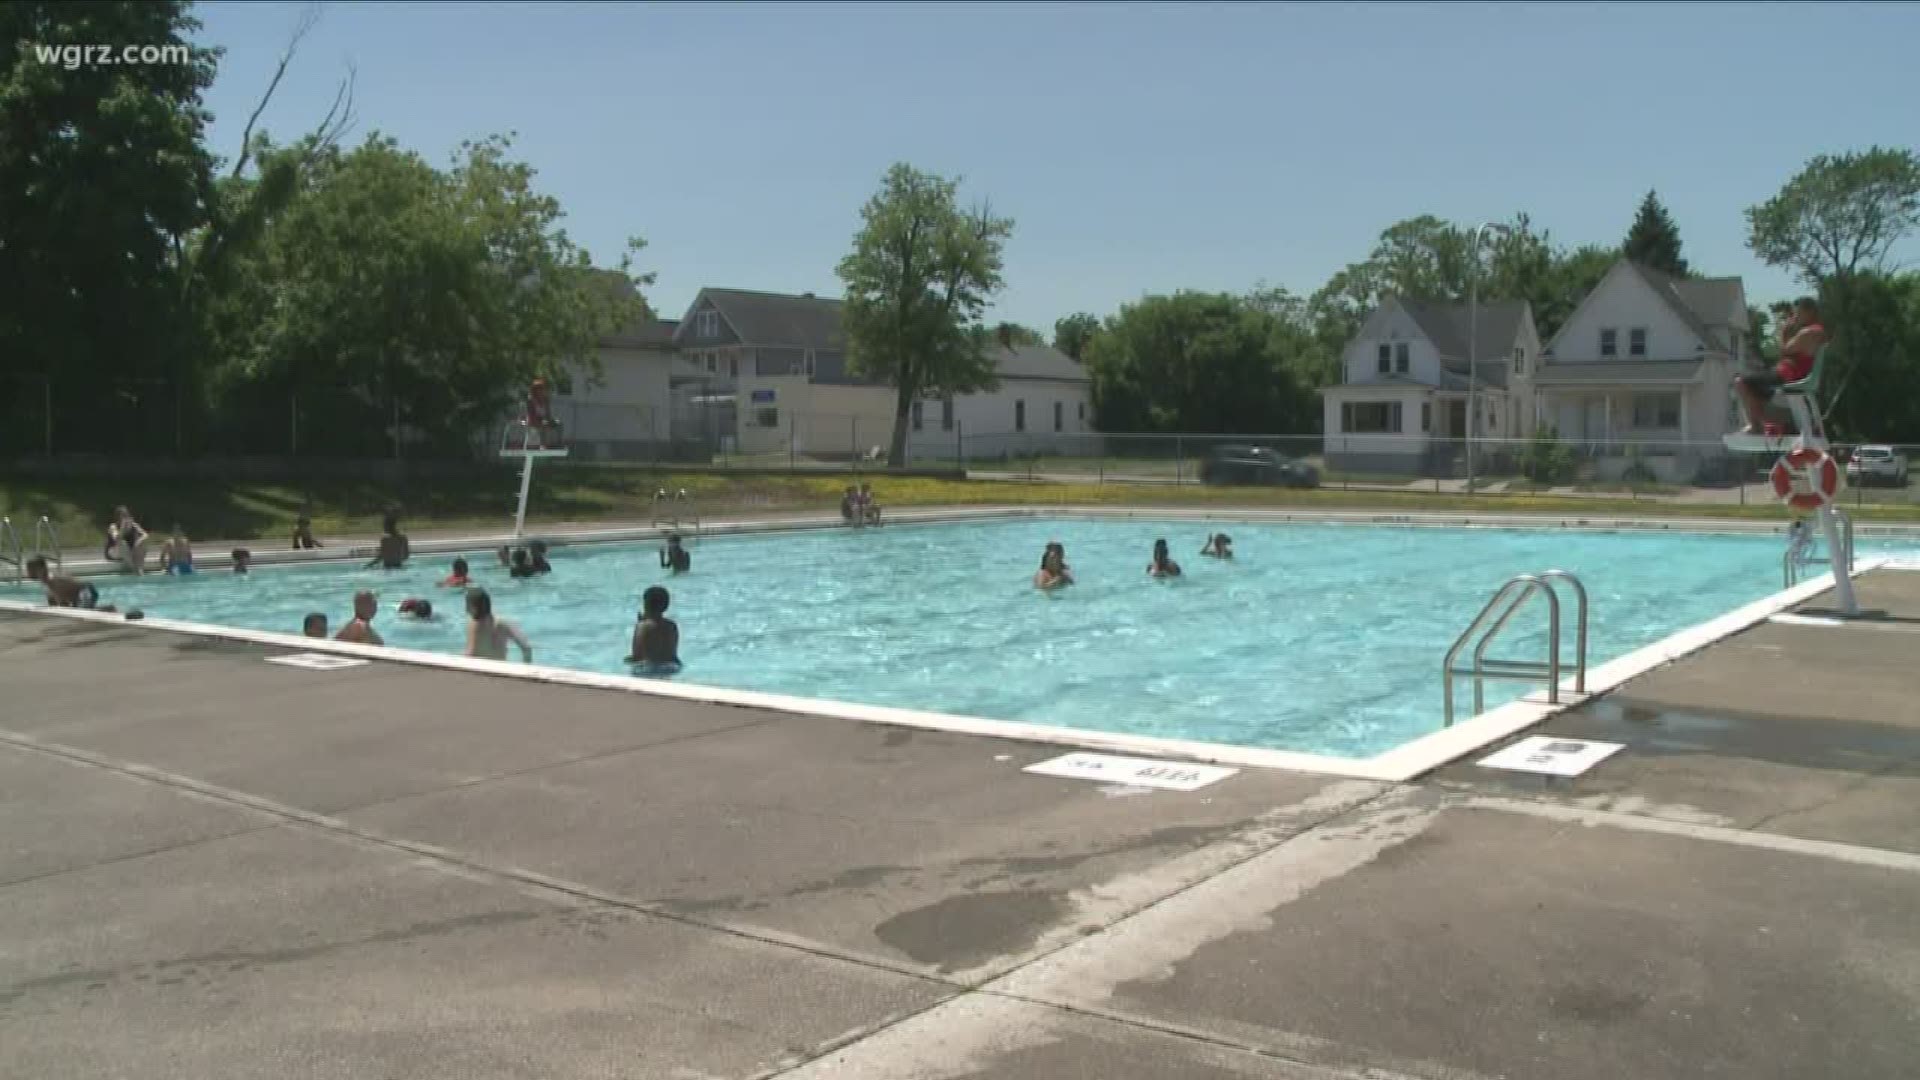 To help residents beat the forecasted high temperatures, city pools and splash pads will be open from 11:00 AM until 6:00 PM on Thursday and Friday.